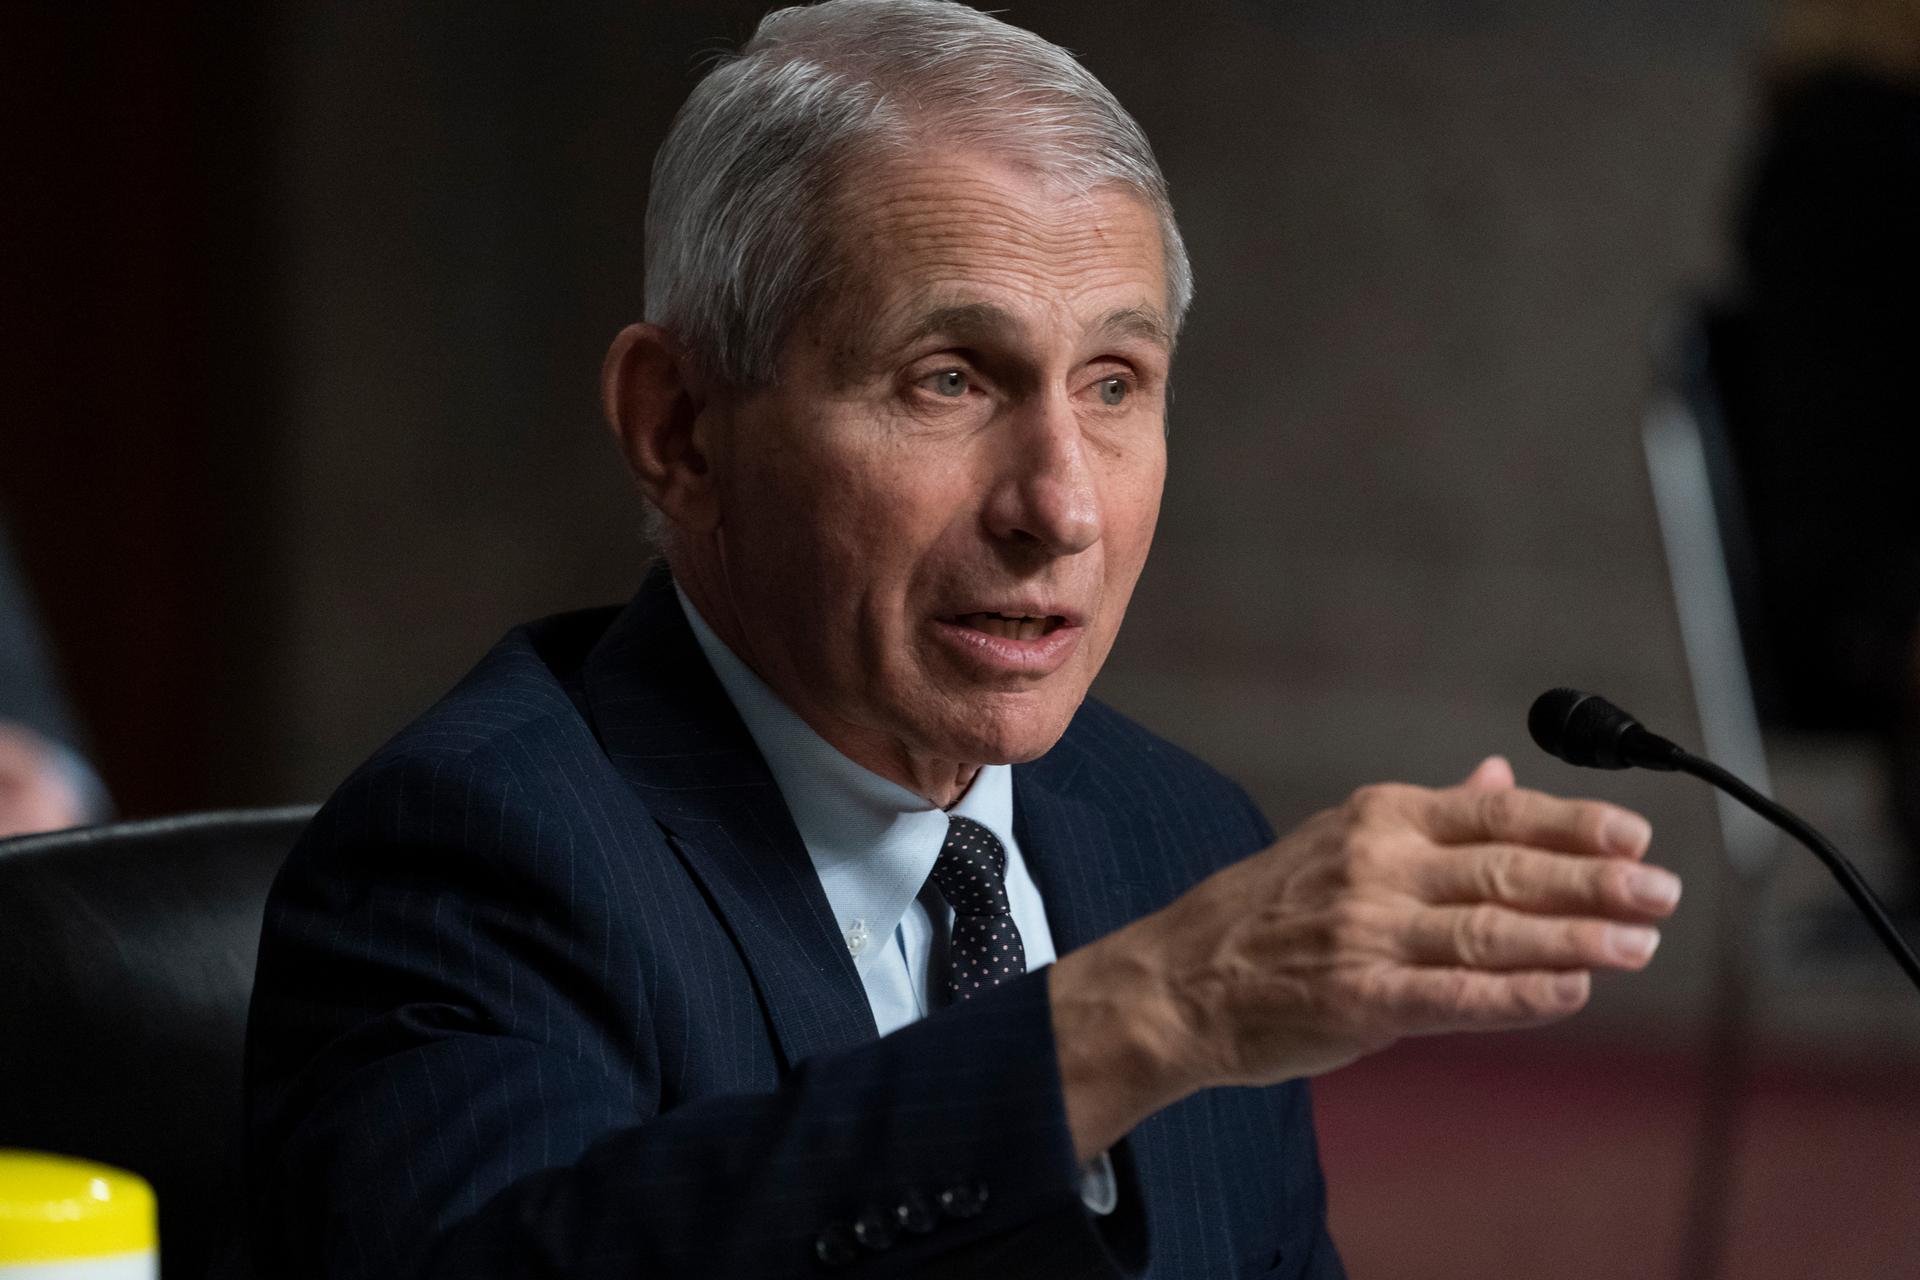 Dr. Anthony Fauci, director of the National Institute of Allergy and Infectious Diseases, speaks during a Senate Health, Education, Labor, and Pensions Committee hearing on Capitol Hill, Nov. 4, 2021, in Washington.